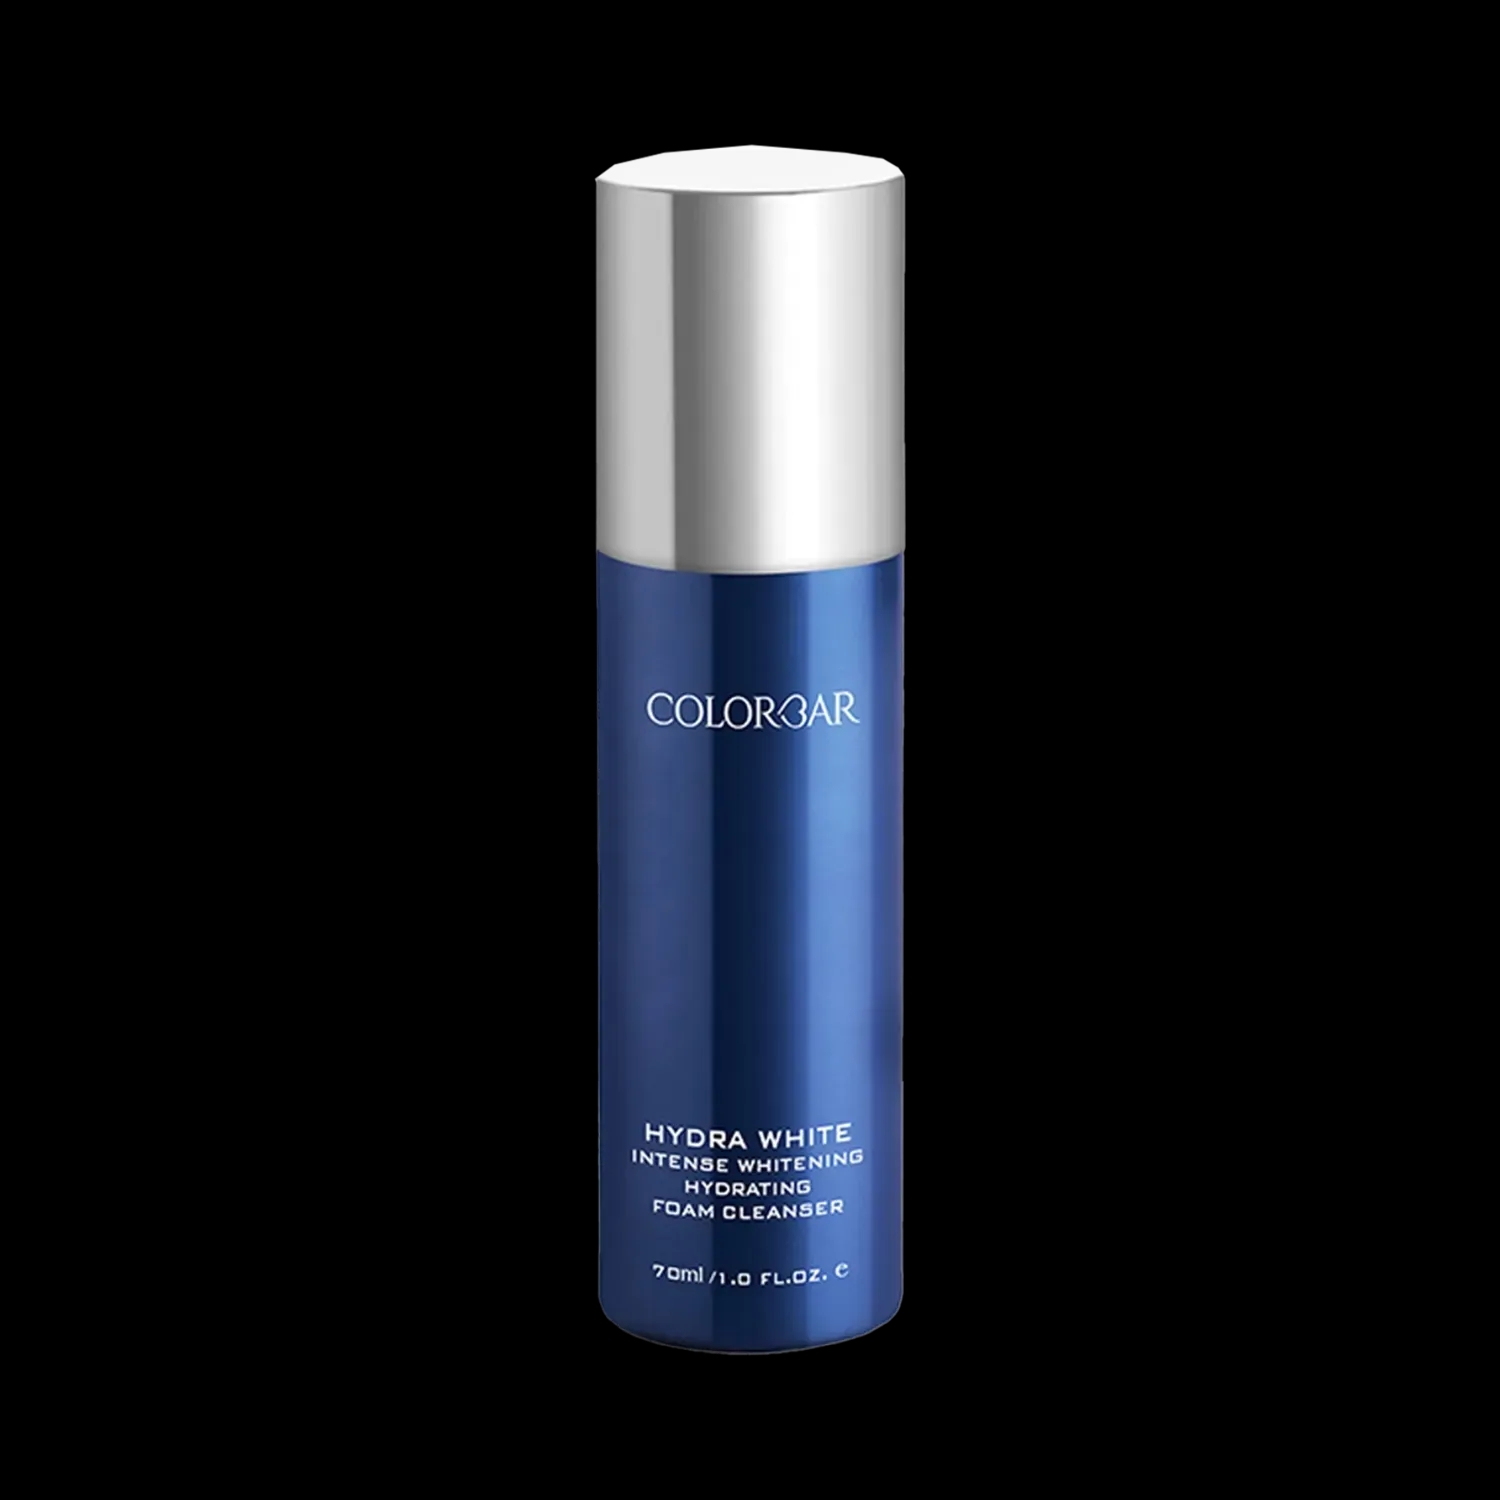 Colorbar | Colorbar Hydra White Intense Whitening Hydrating Foam Cleanser (70ml)